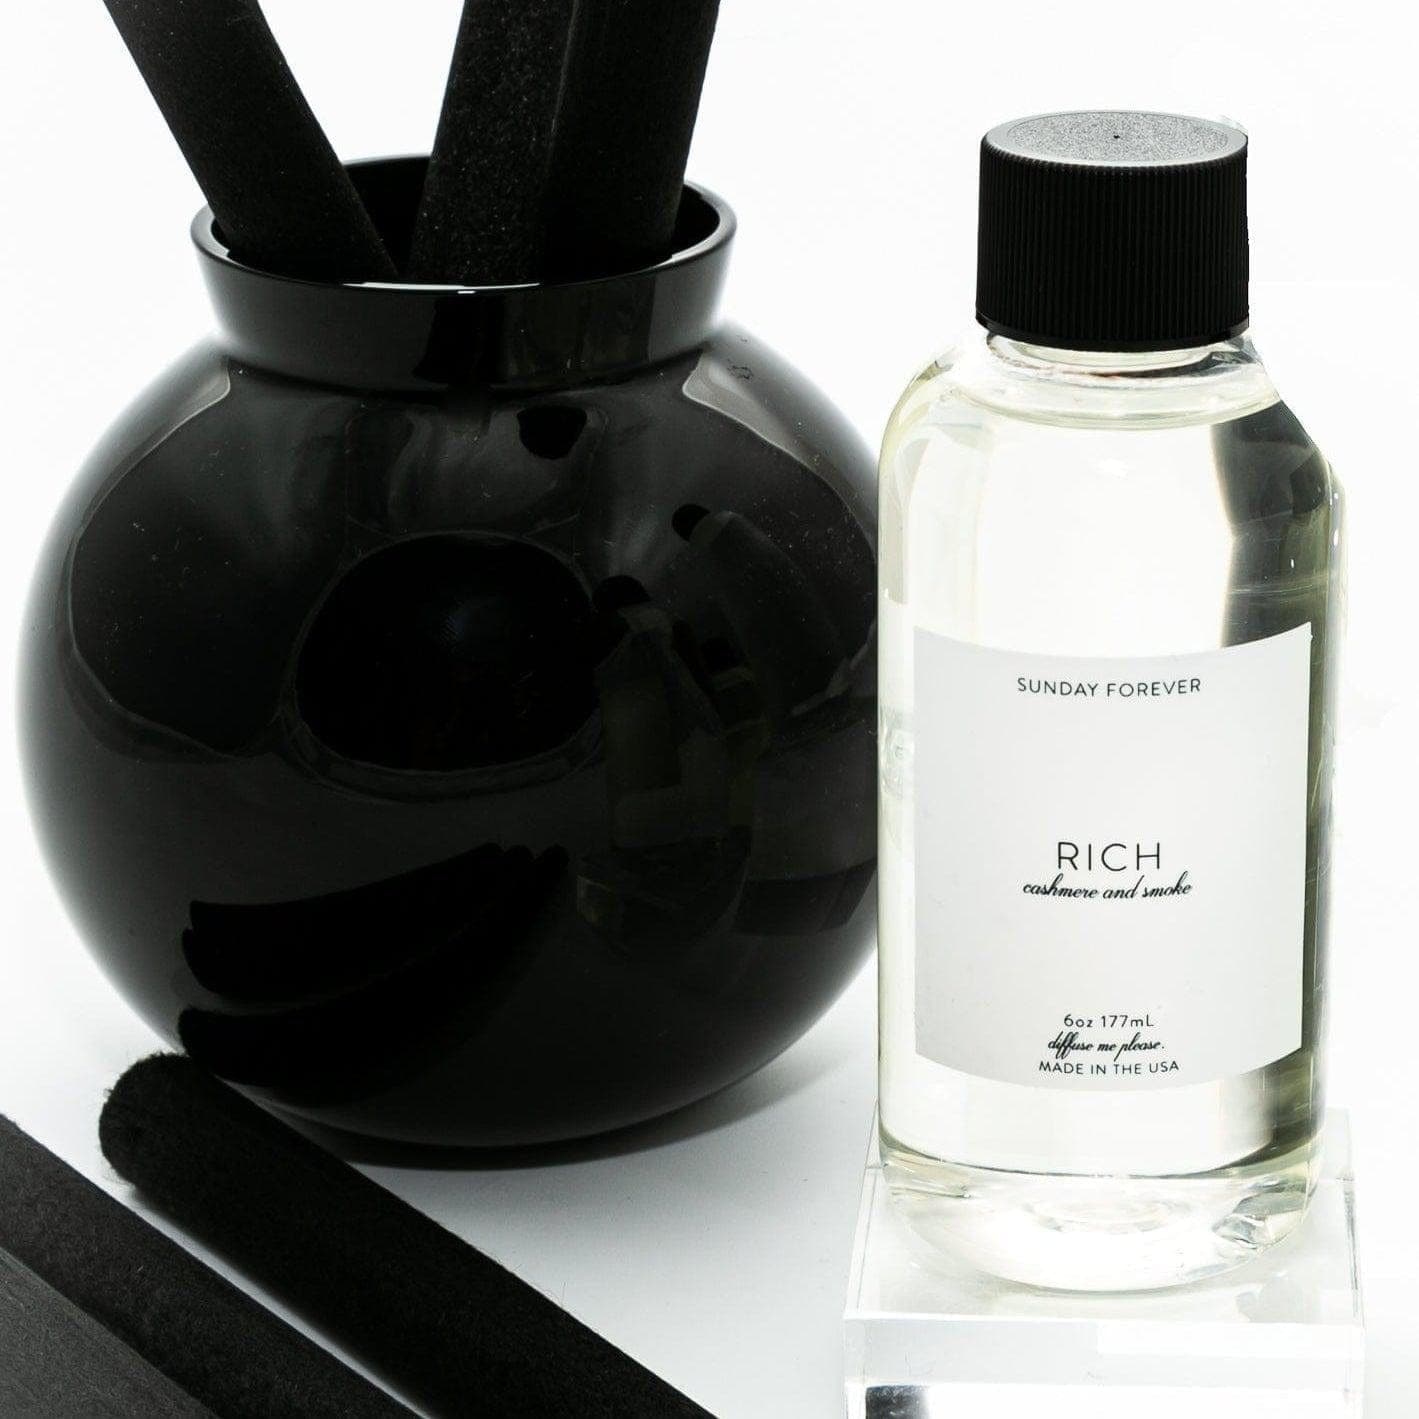 Limited Edition Luxe Diffuser with Mega Reeds - Home Fragrances-Sunday Forever